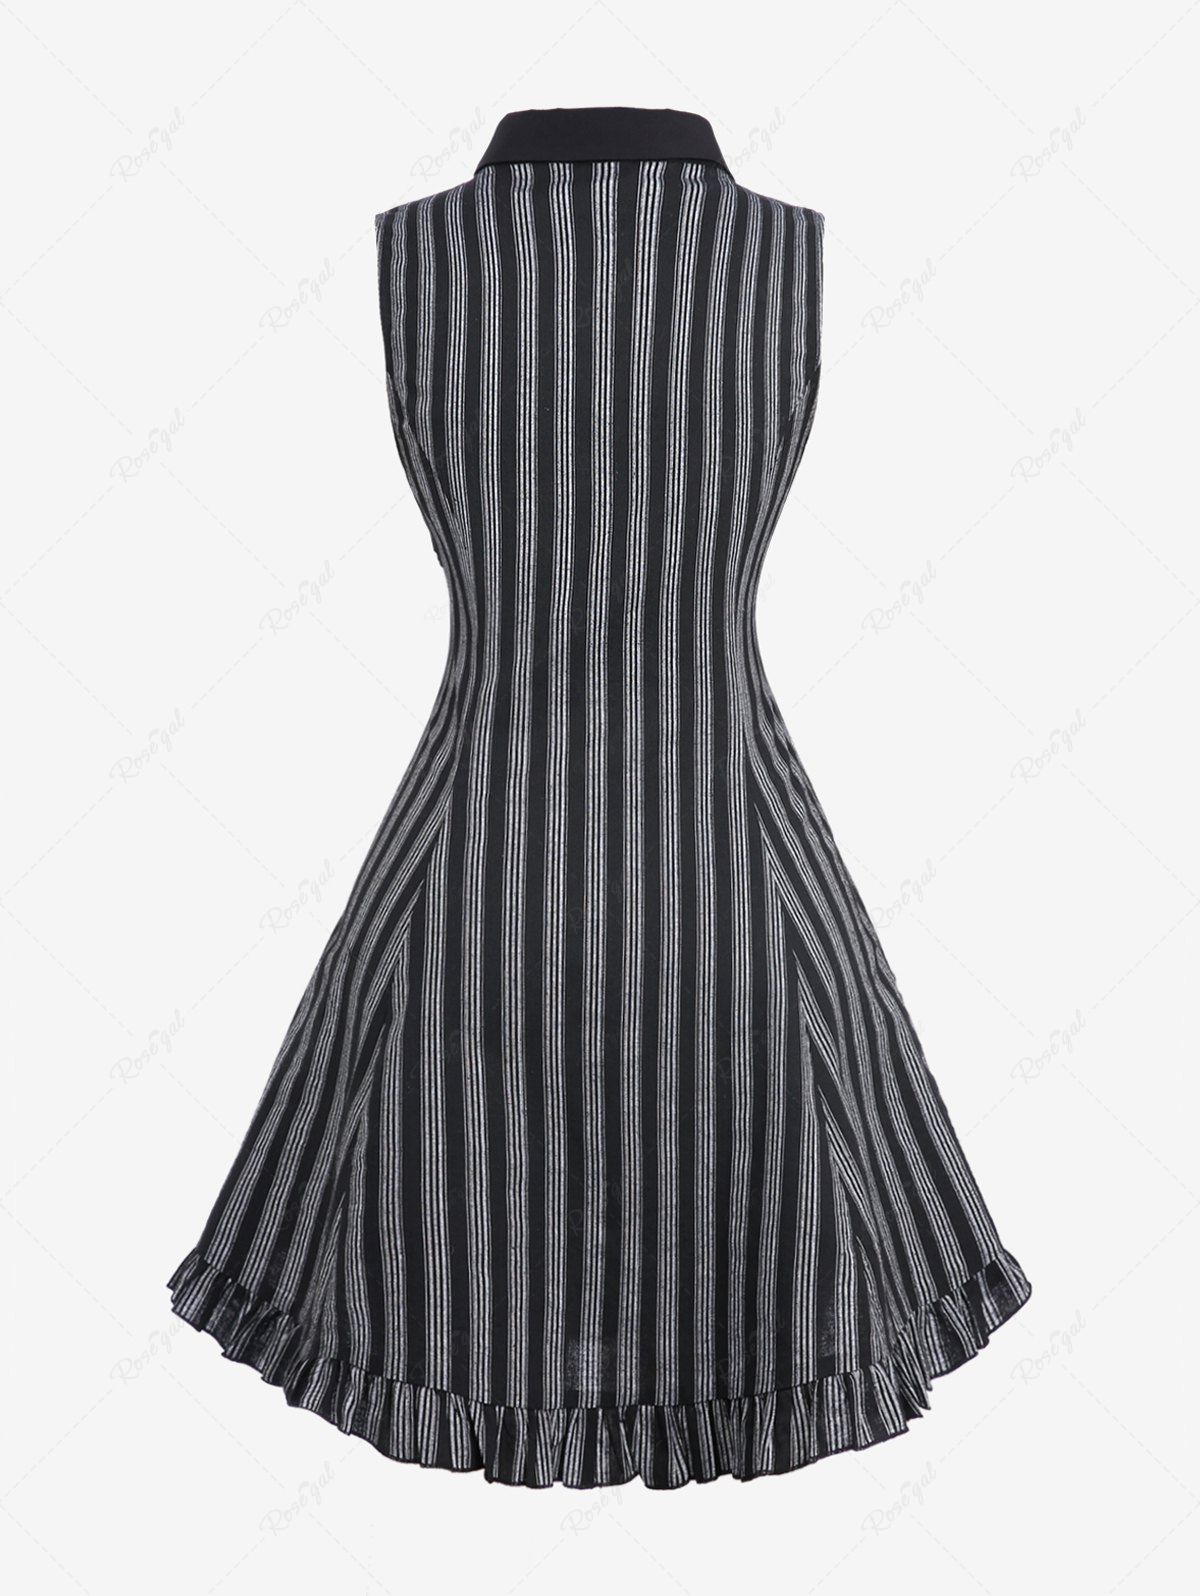 Gothic Turn-down Collar Striped Print Flounce Trim Full Buttons Cutout Patchwork Panel Sleeveless 1950s Vintage Dress